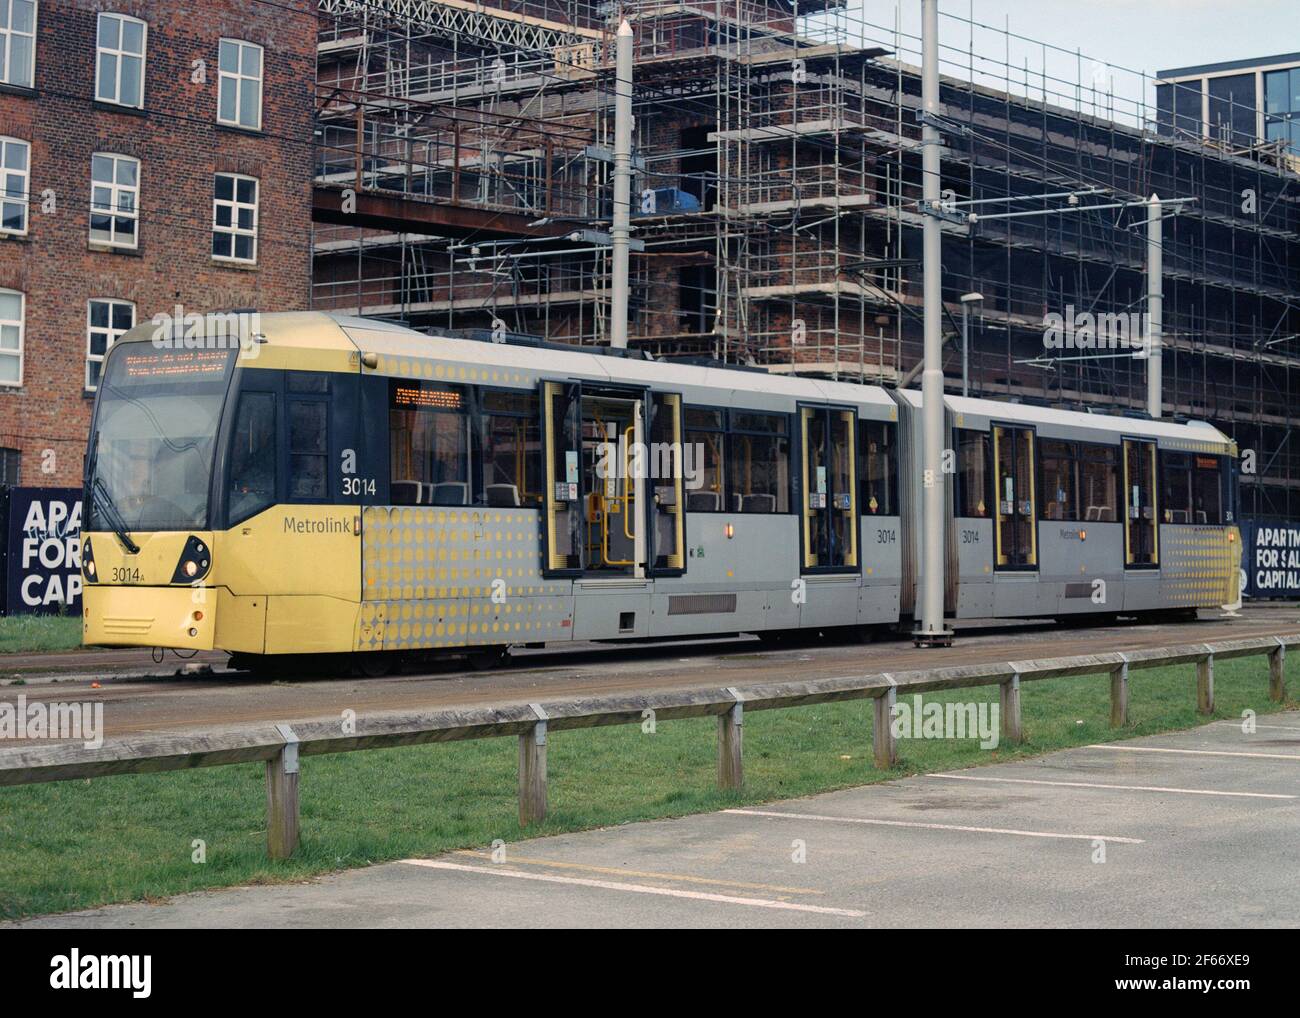 Manchester, UK - September 2020: A Metrolink tram (Bombardier M5000 ) at the siding near Manchester Piccadilly railway station. Stock Photo